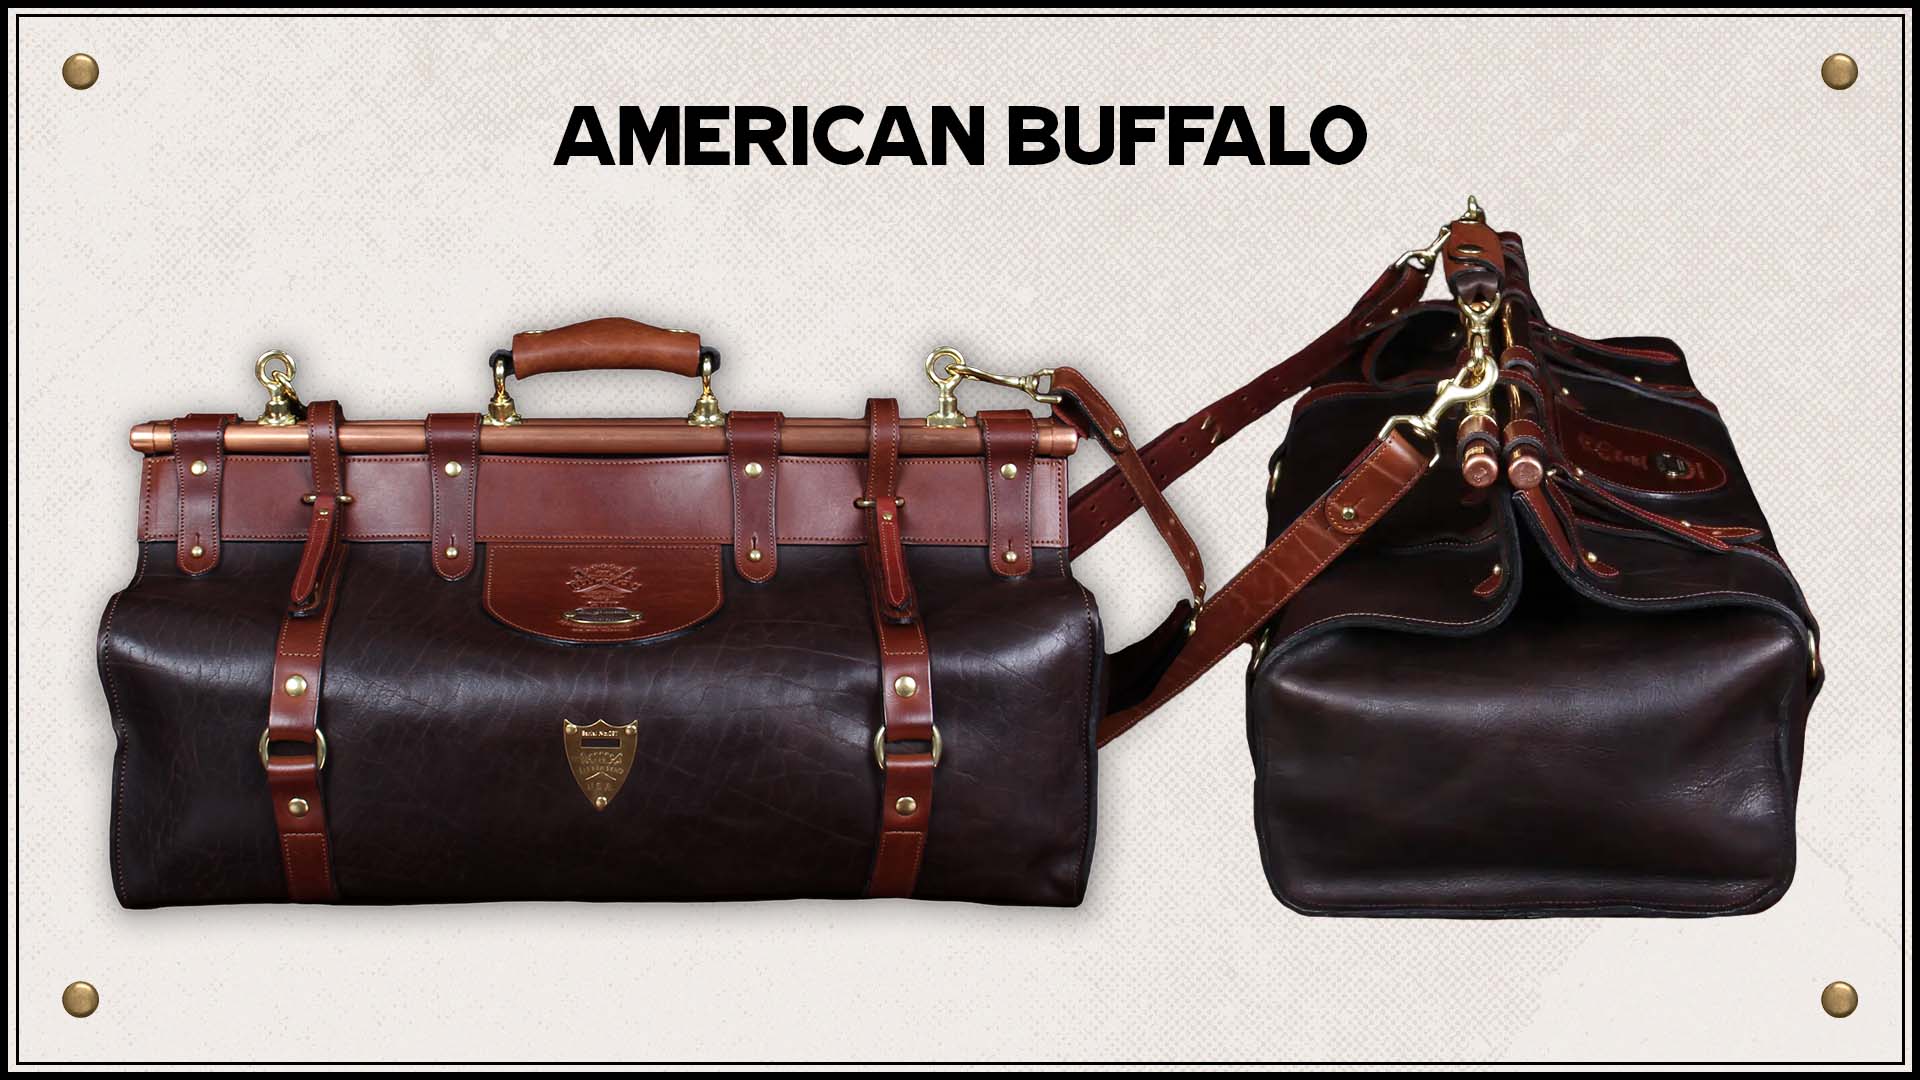 No. 3 Grip Bag front and side view in American Buffalo